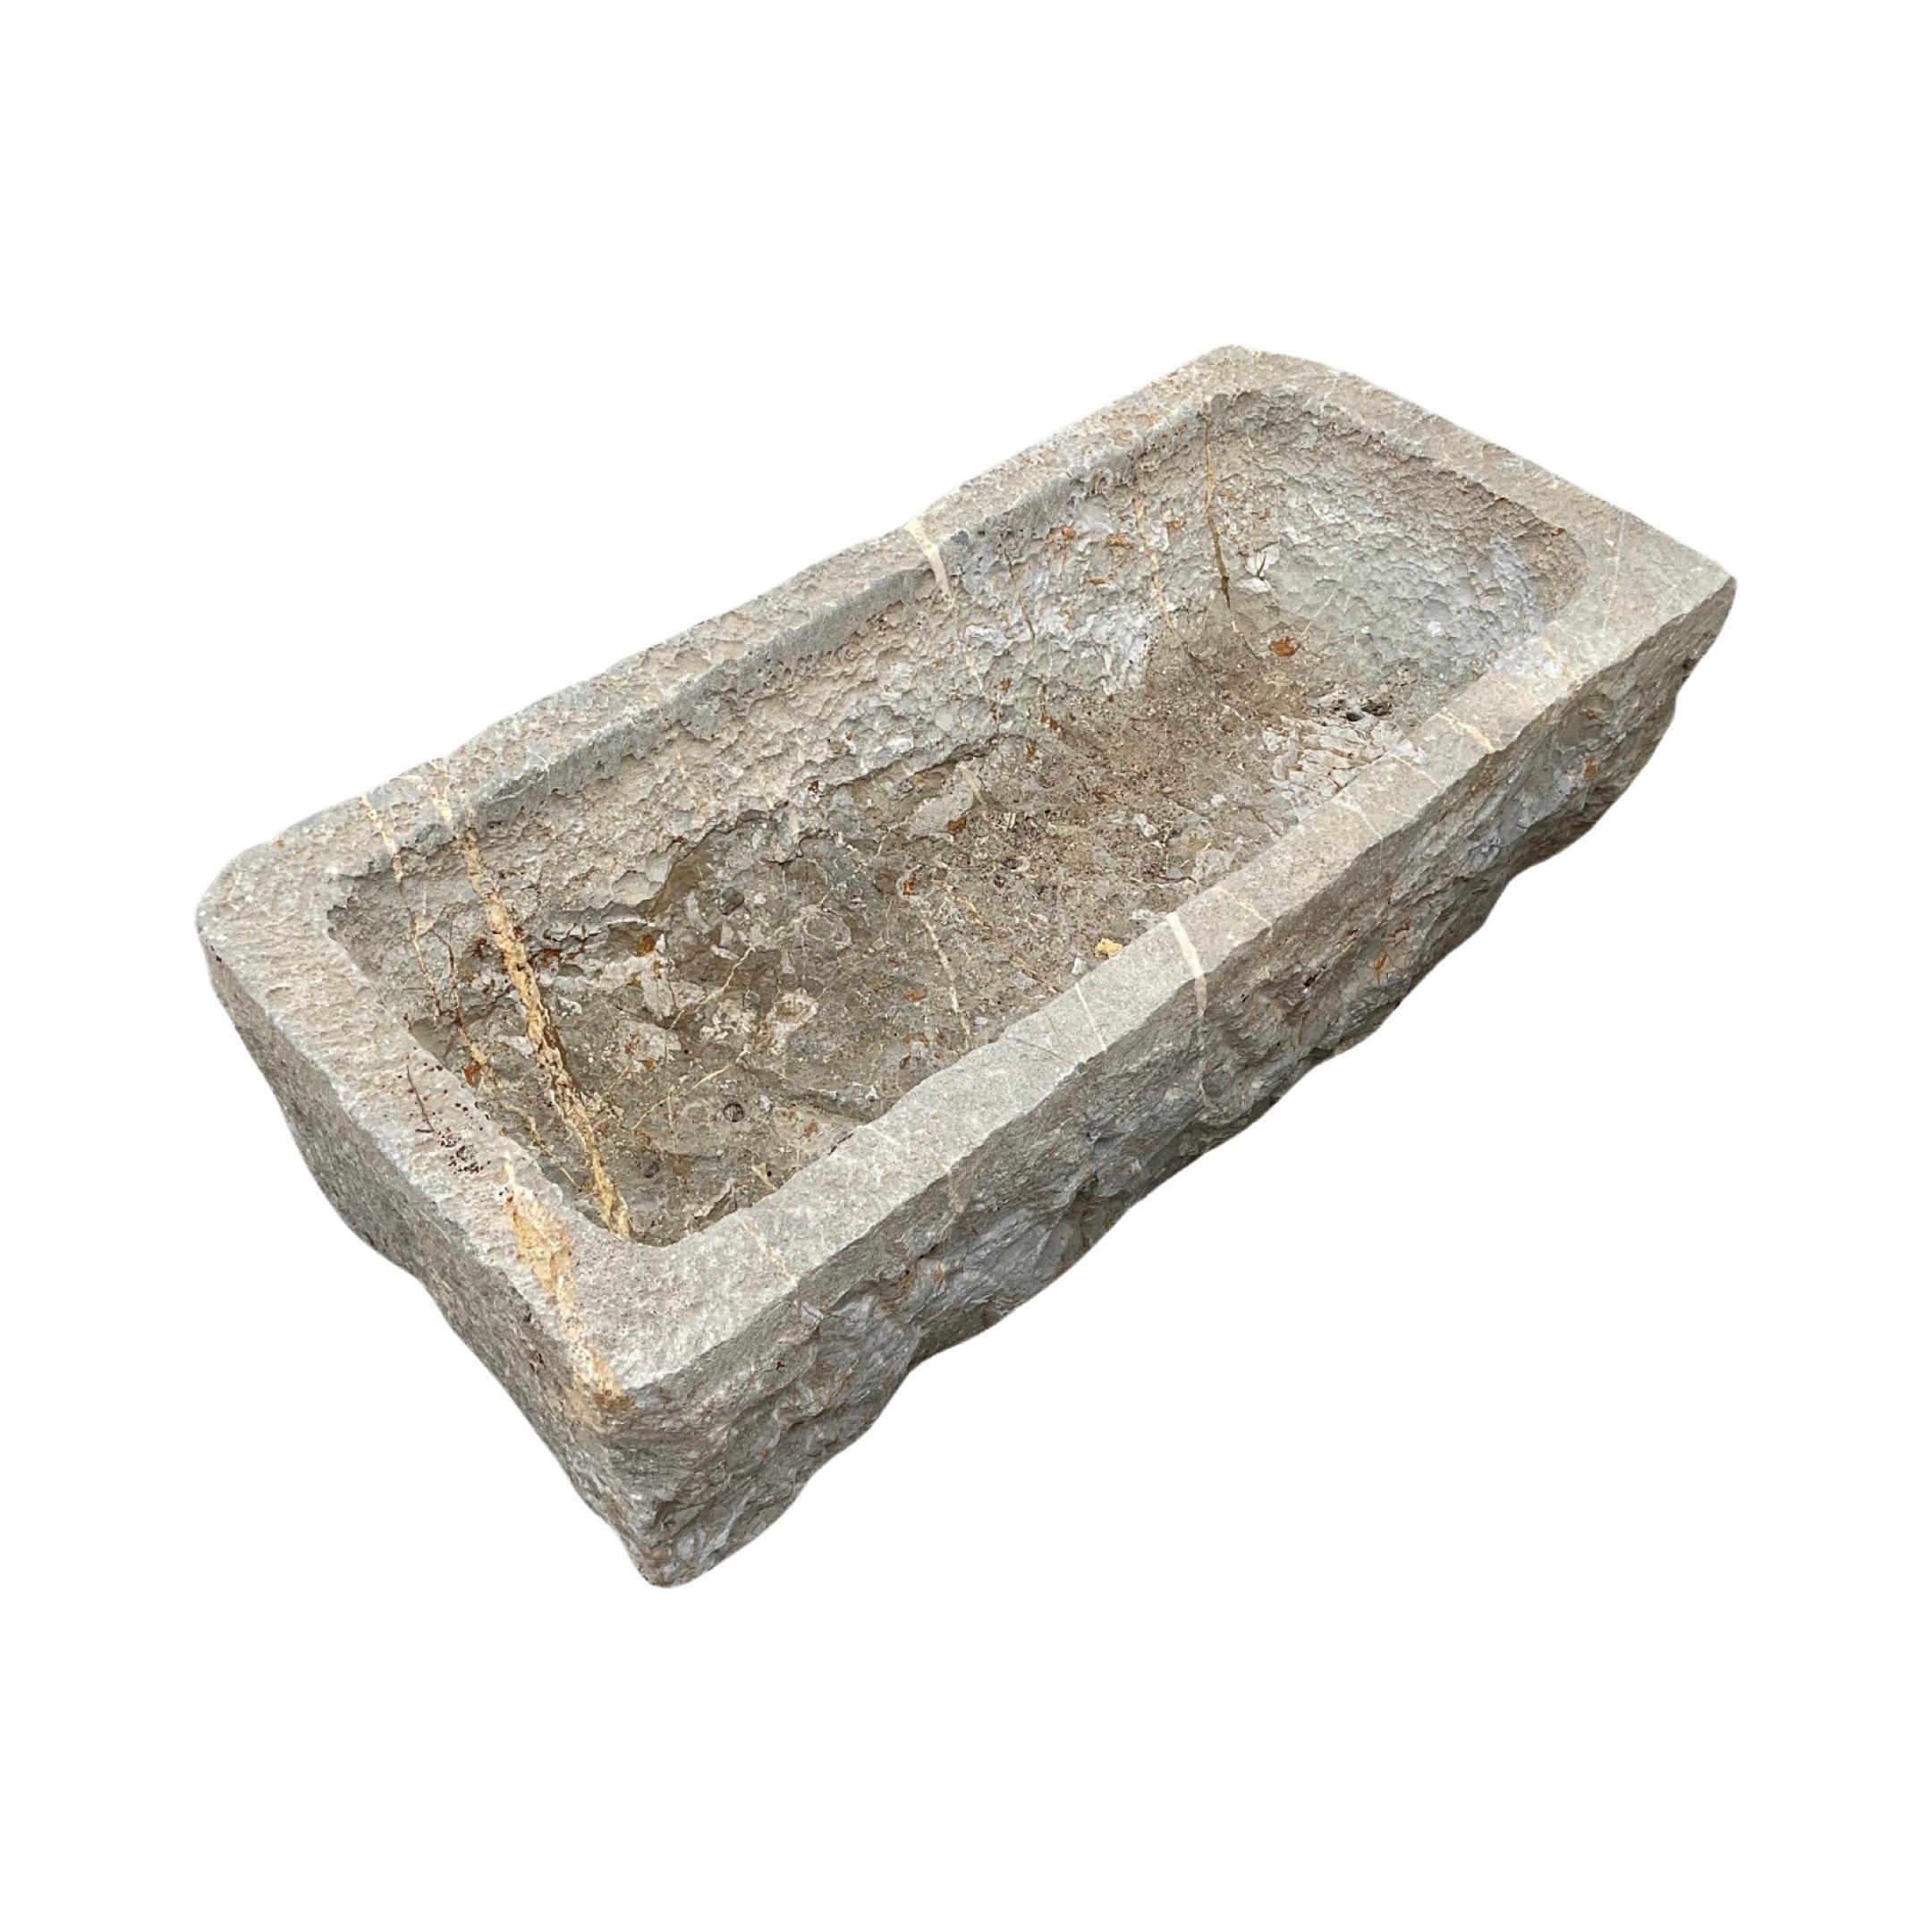 This small 18th century trough, crafted from authentic Belgian bluestone, adds a touch of antique charm to any space. Its unique style and rich history make it a one-of-a-kind piece with undeniable character. Perfect for adding an elegant touch to